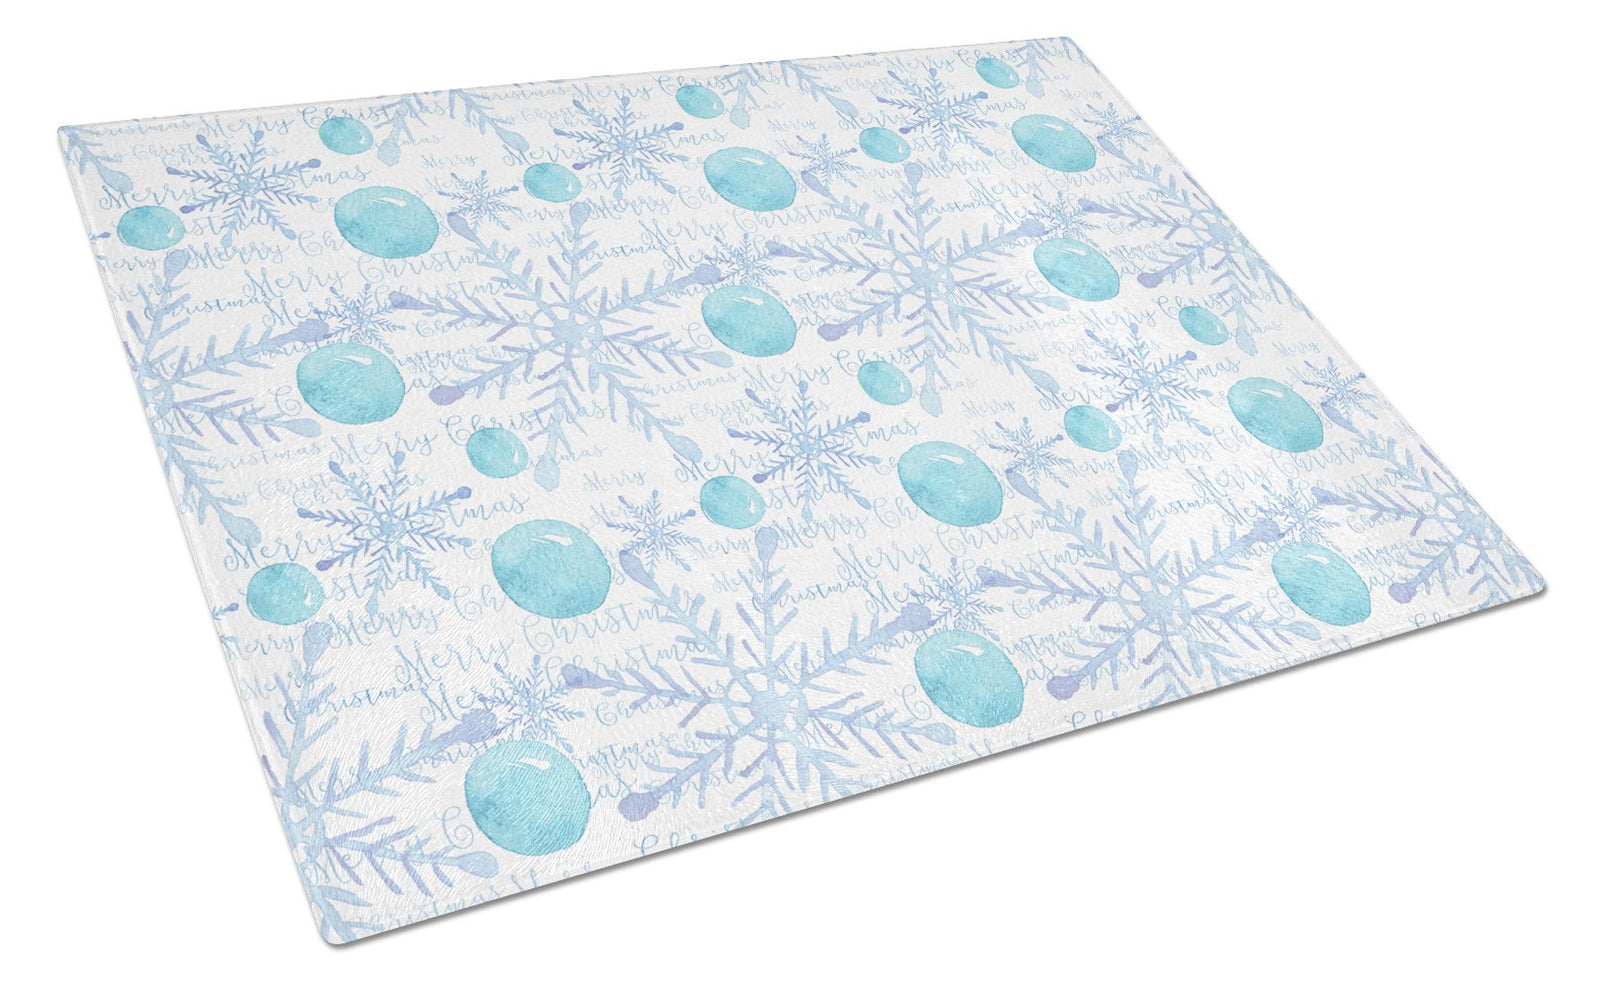 Winter Snowflakes on White Glass Cutting Board Large BB7487LCB by Caroline's Treasures